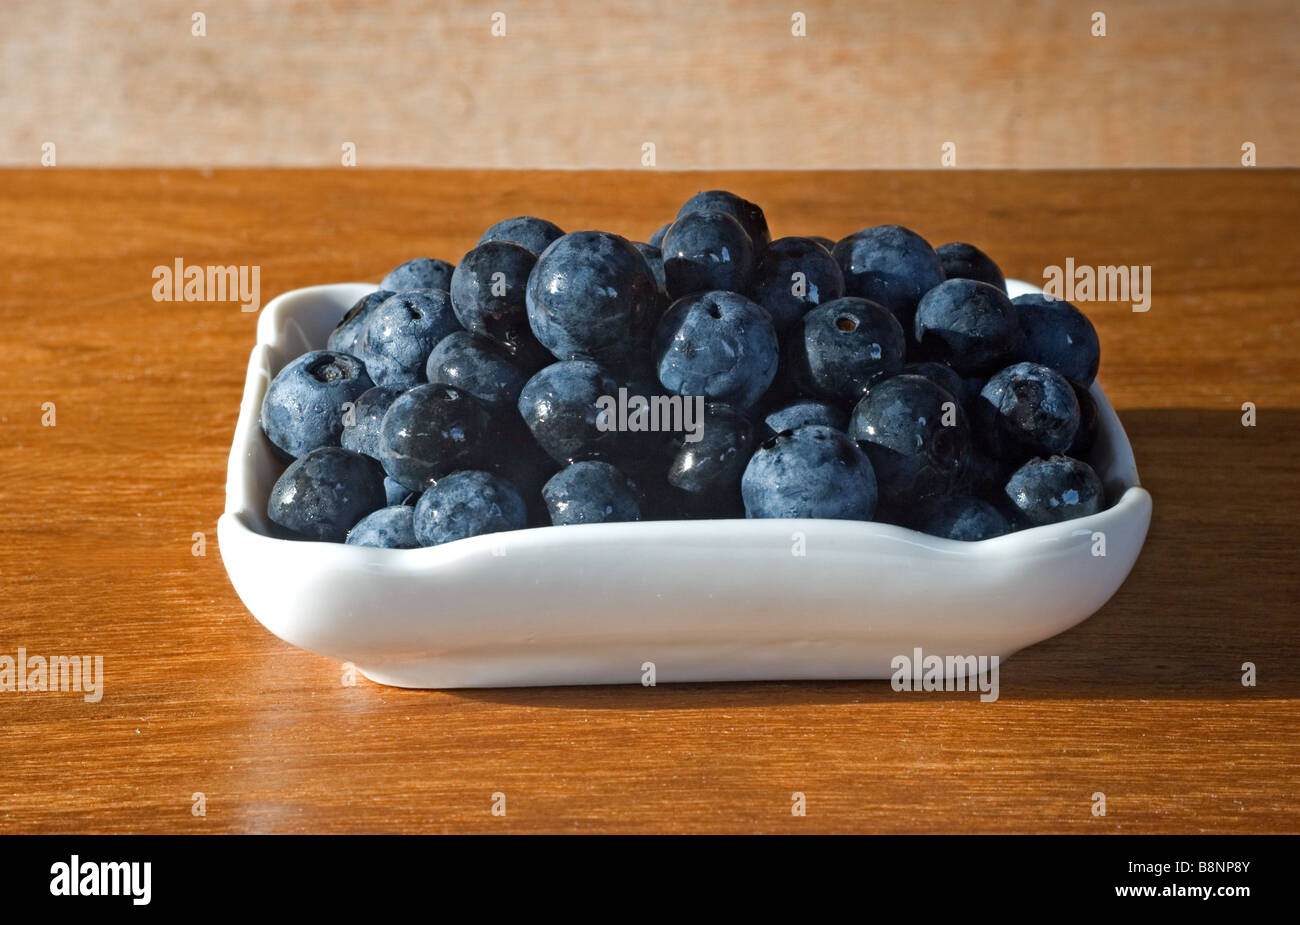 Blueberries in a dish on wooden table Stock Photo